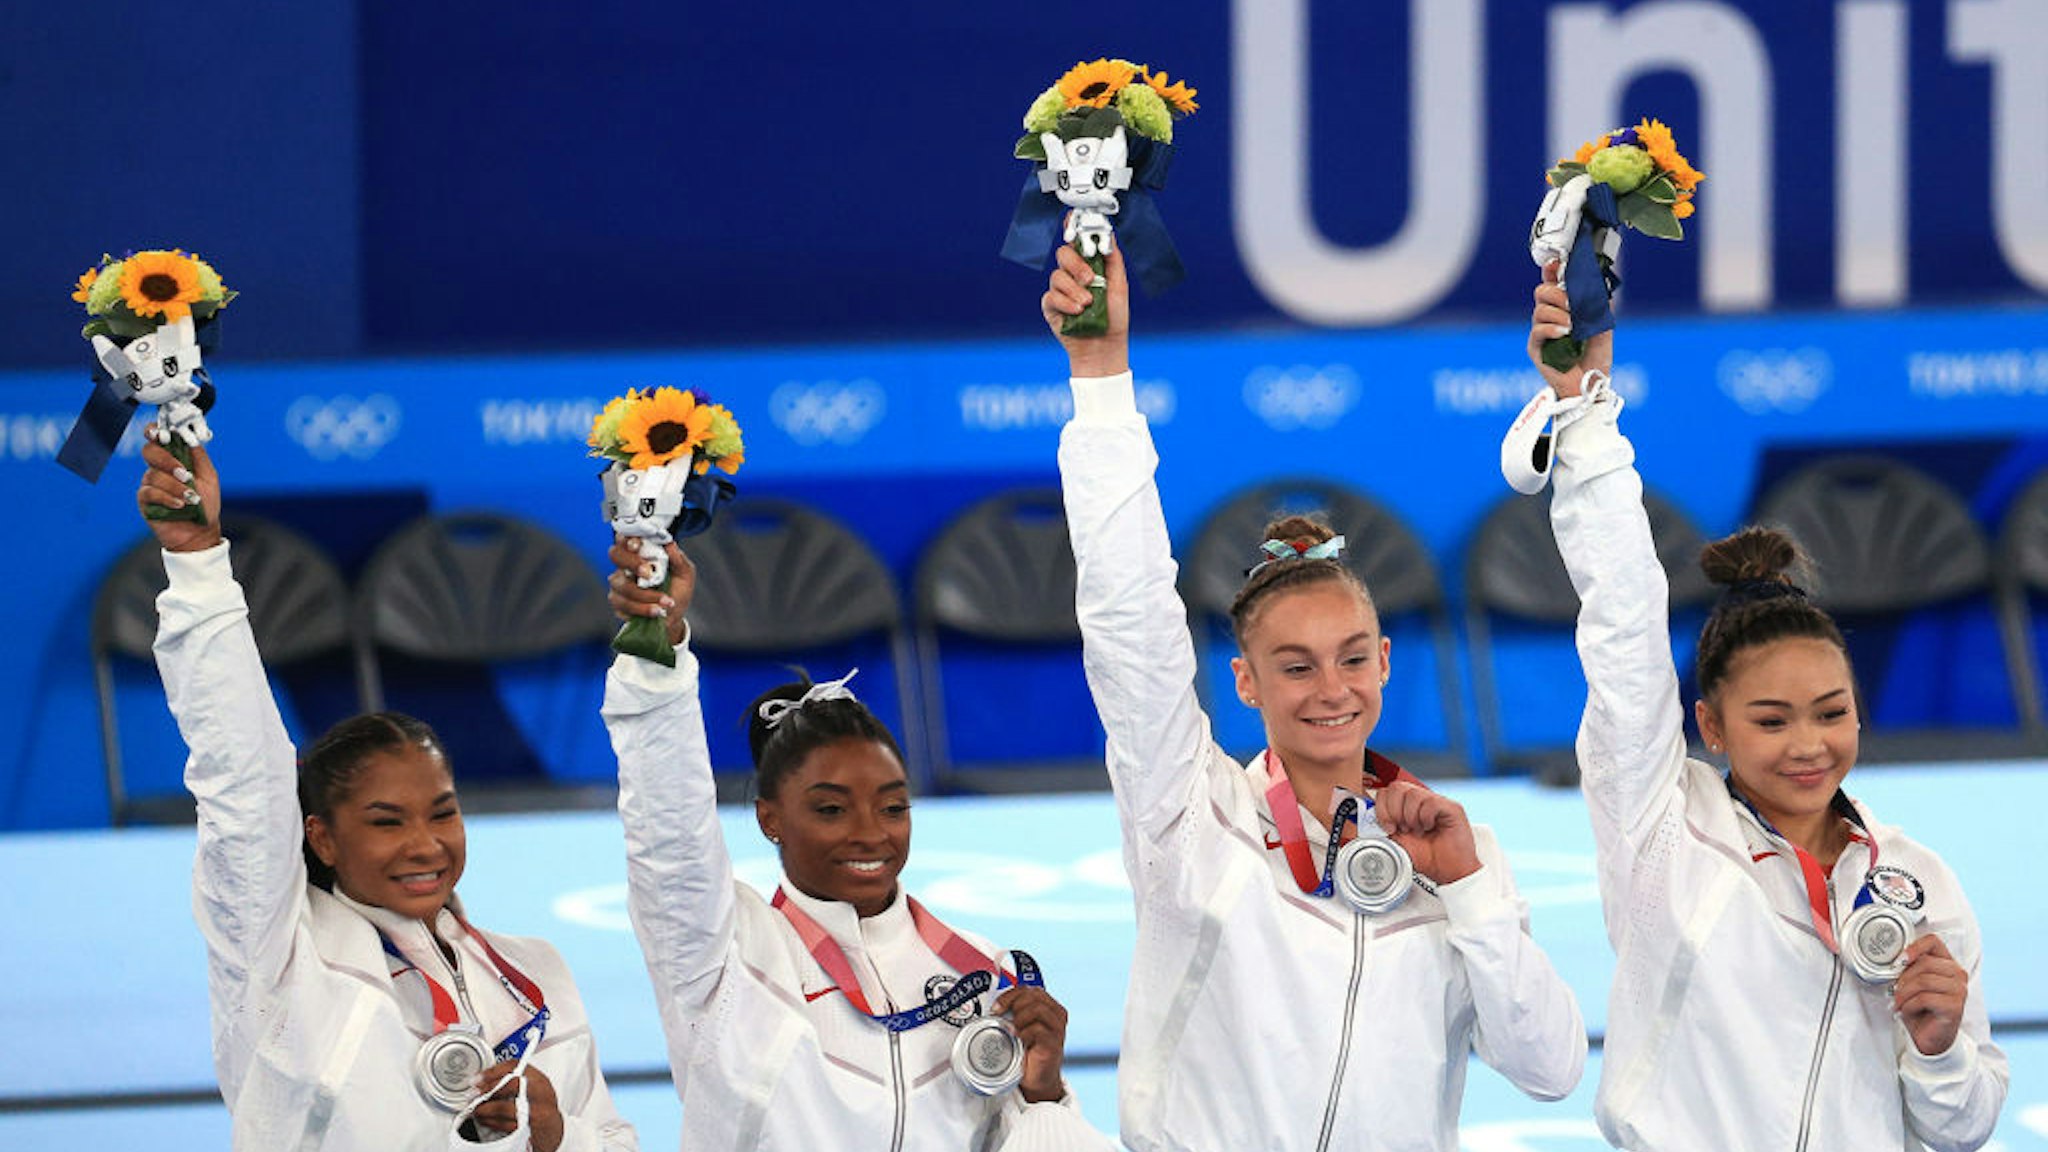 TOKYO, JAPAN JULY 27, 2021: Silver medallists Simone Biles, Jordan Chiles, Grace McCallum, and Sunisa Lee (L-R) of the United States pose at a victory ceremony for the women's artistic gymnastics team all-around event at the 2020 Summer Olympic Games, at the Ariake Gymnastics Centre. Sergei Bobylev/TASS (Photo by Sergei BobylevTASS via Getty Images)